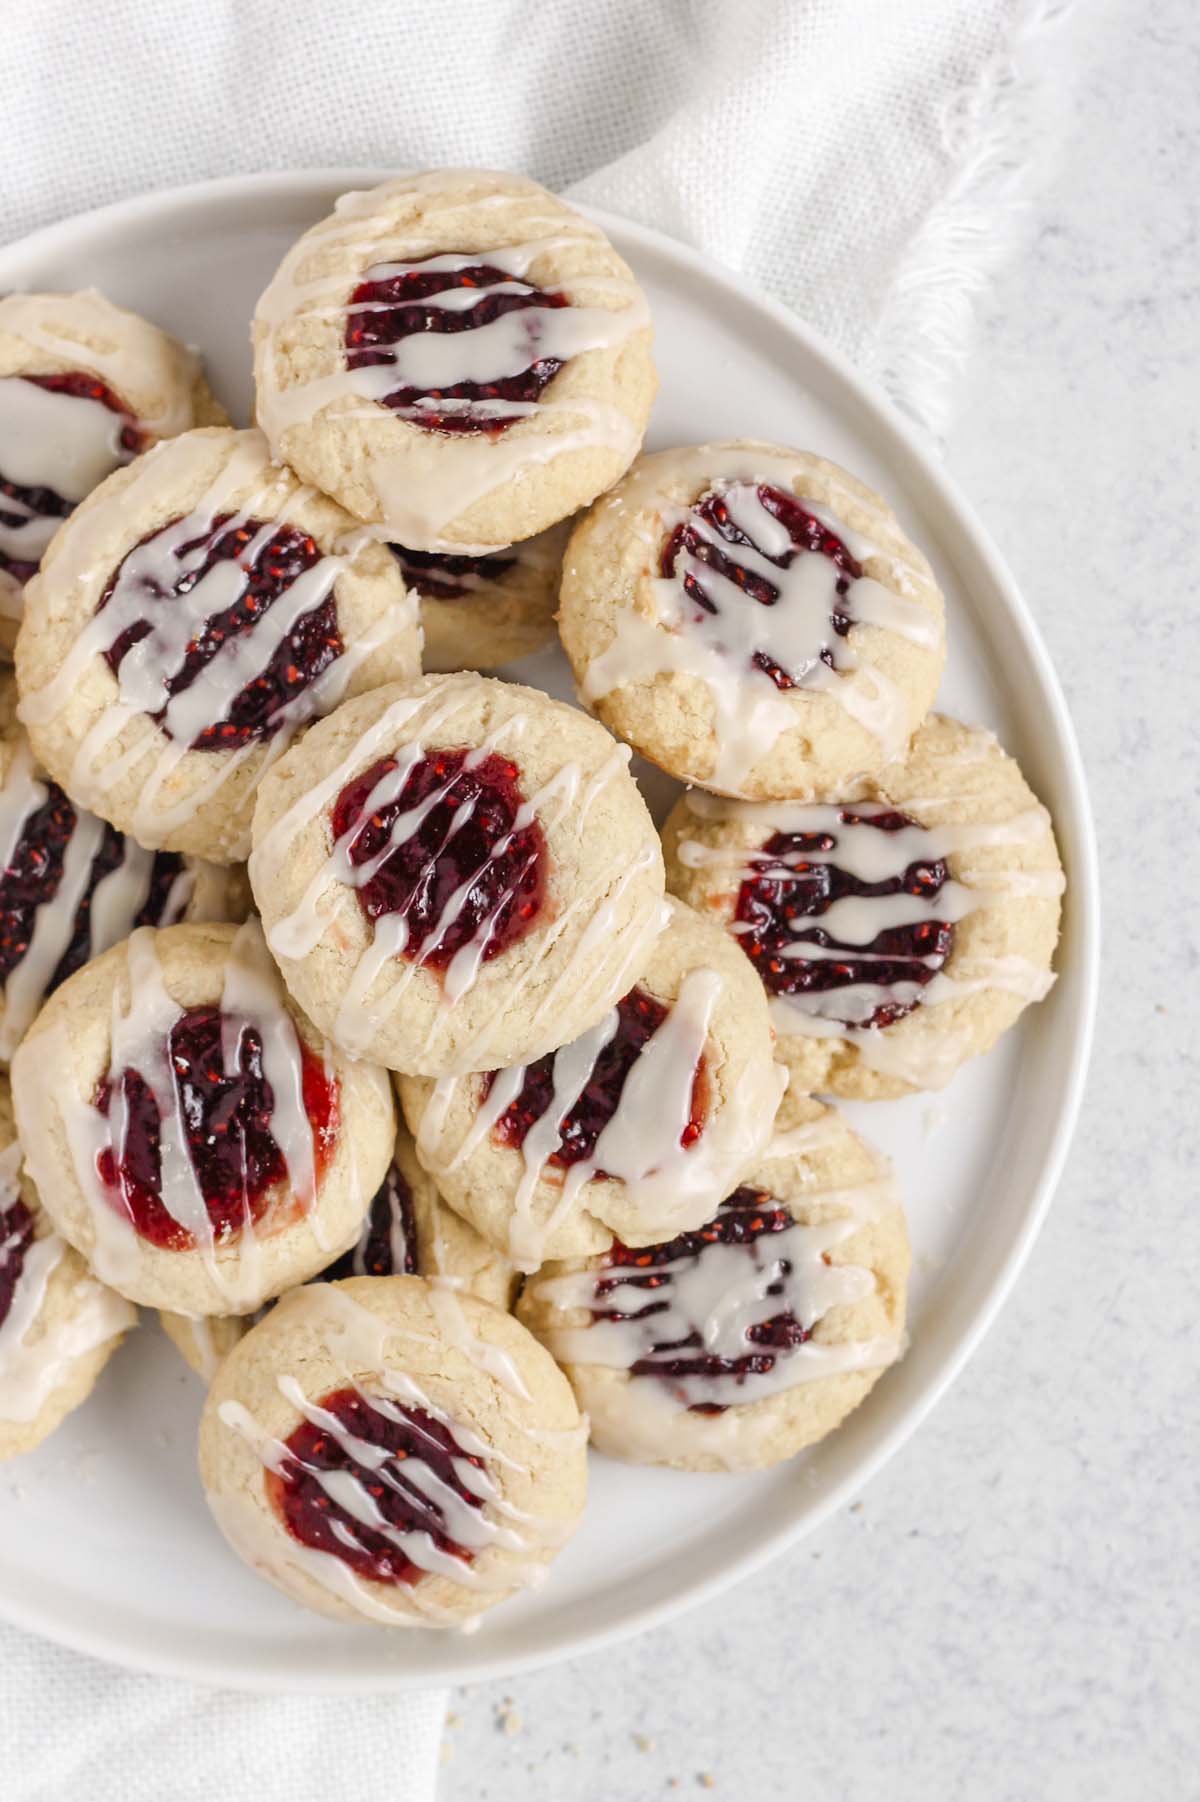 Overhead view of gluten-free raspberry thumbprint cookies on a white plate.